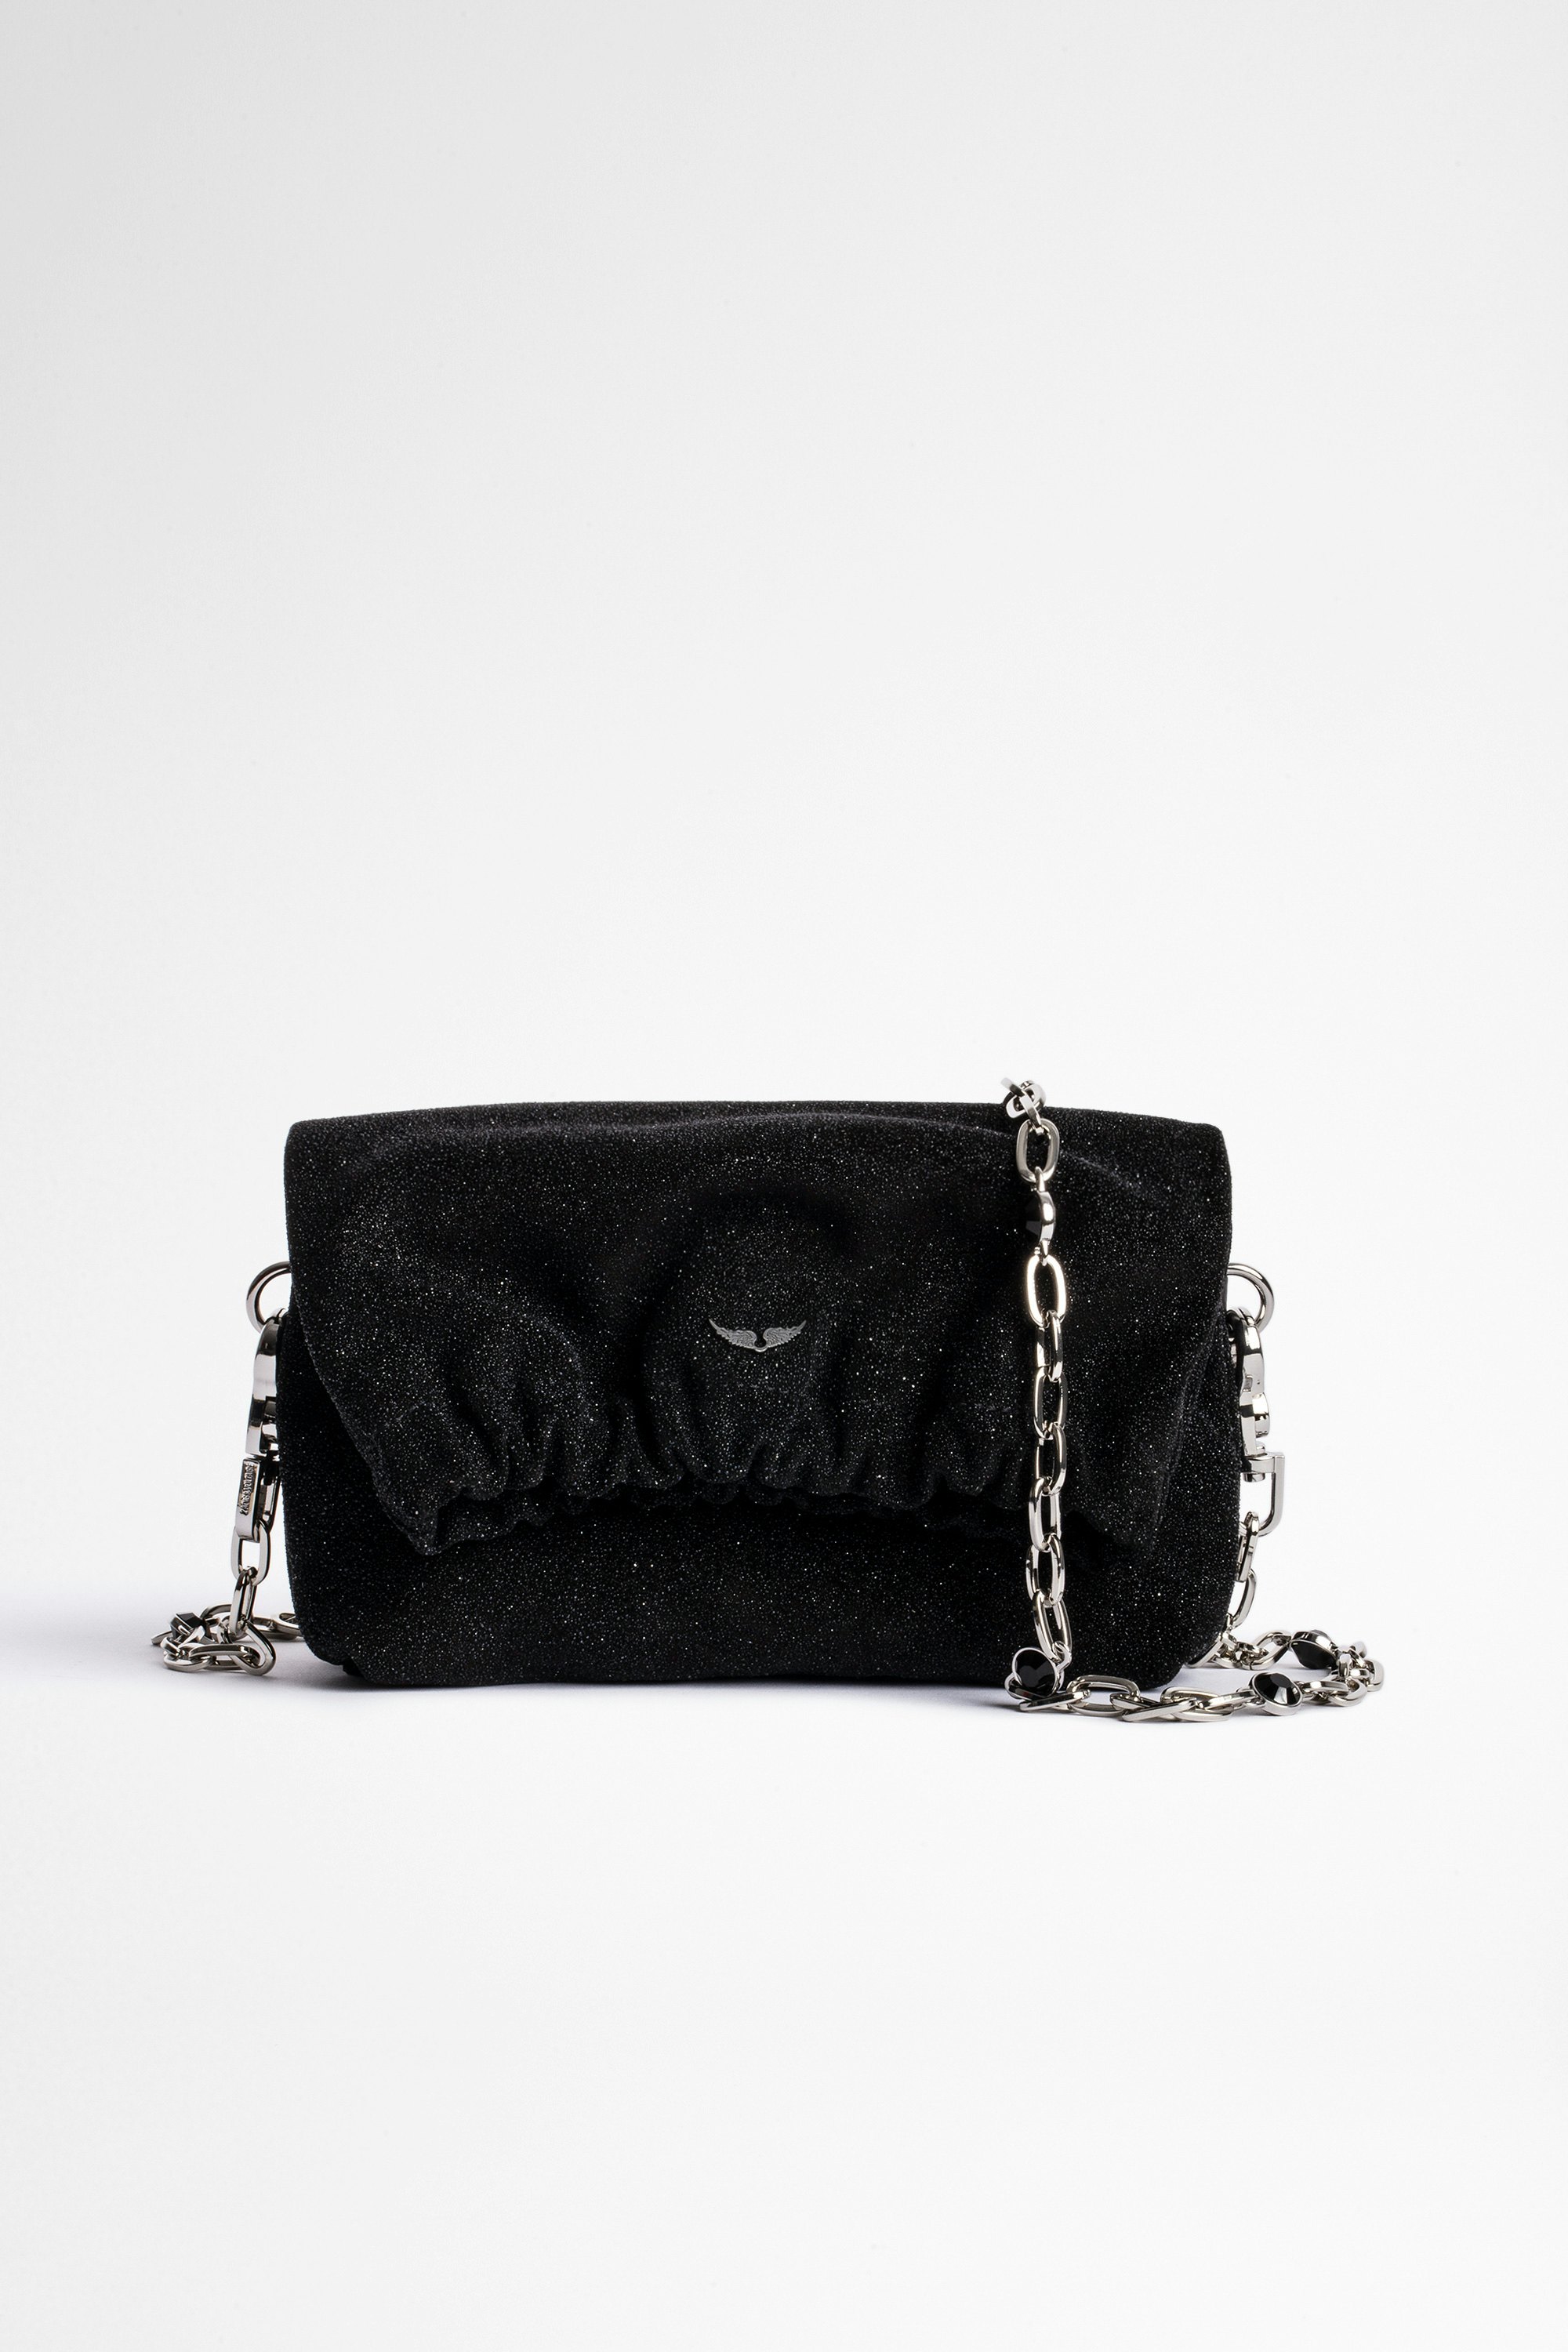 Rockyssime XS Bag Women’s leather clutch in black with silver chain handle